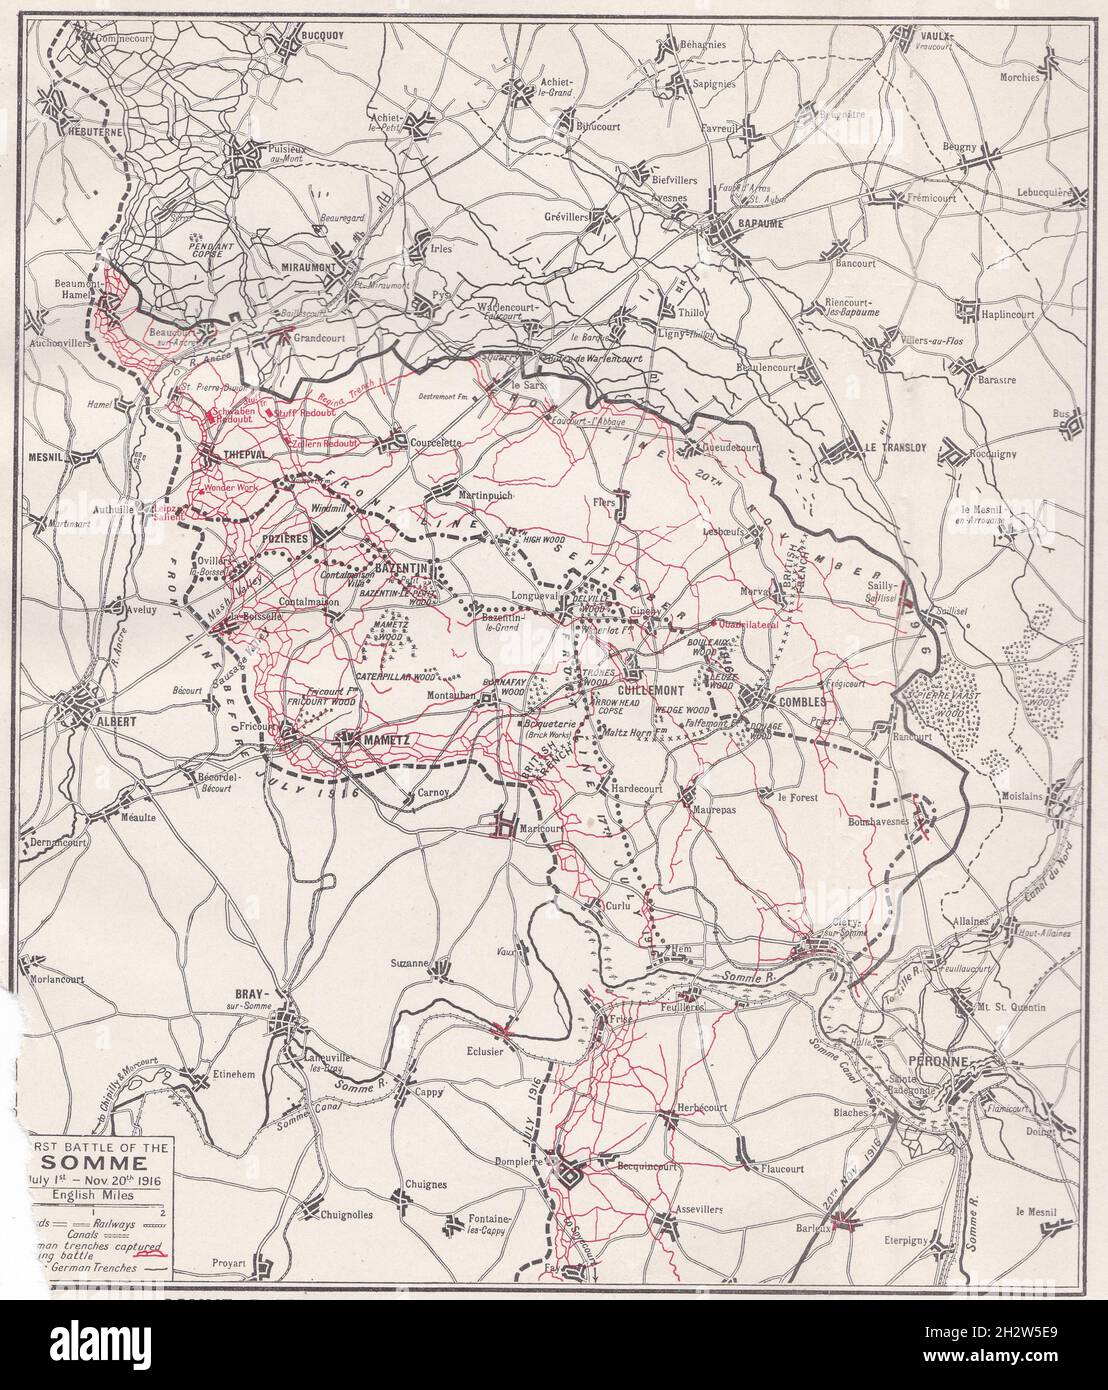 Vintage map of The Somme Battle - Territory gained by Allies and Germans respectively in the two battles of the Somme during The Great War 1916. Stock Photo